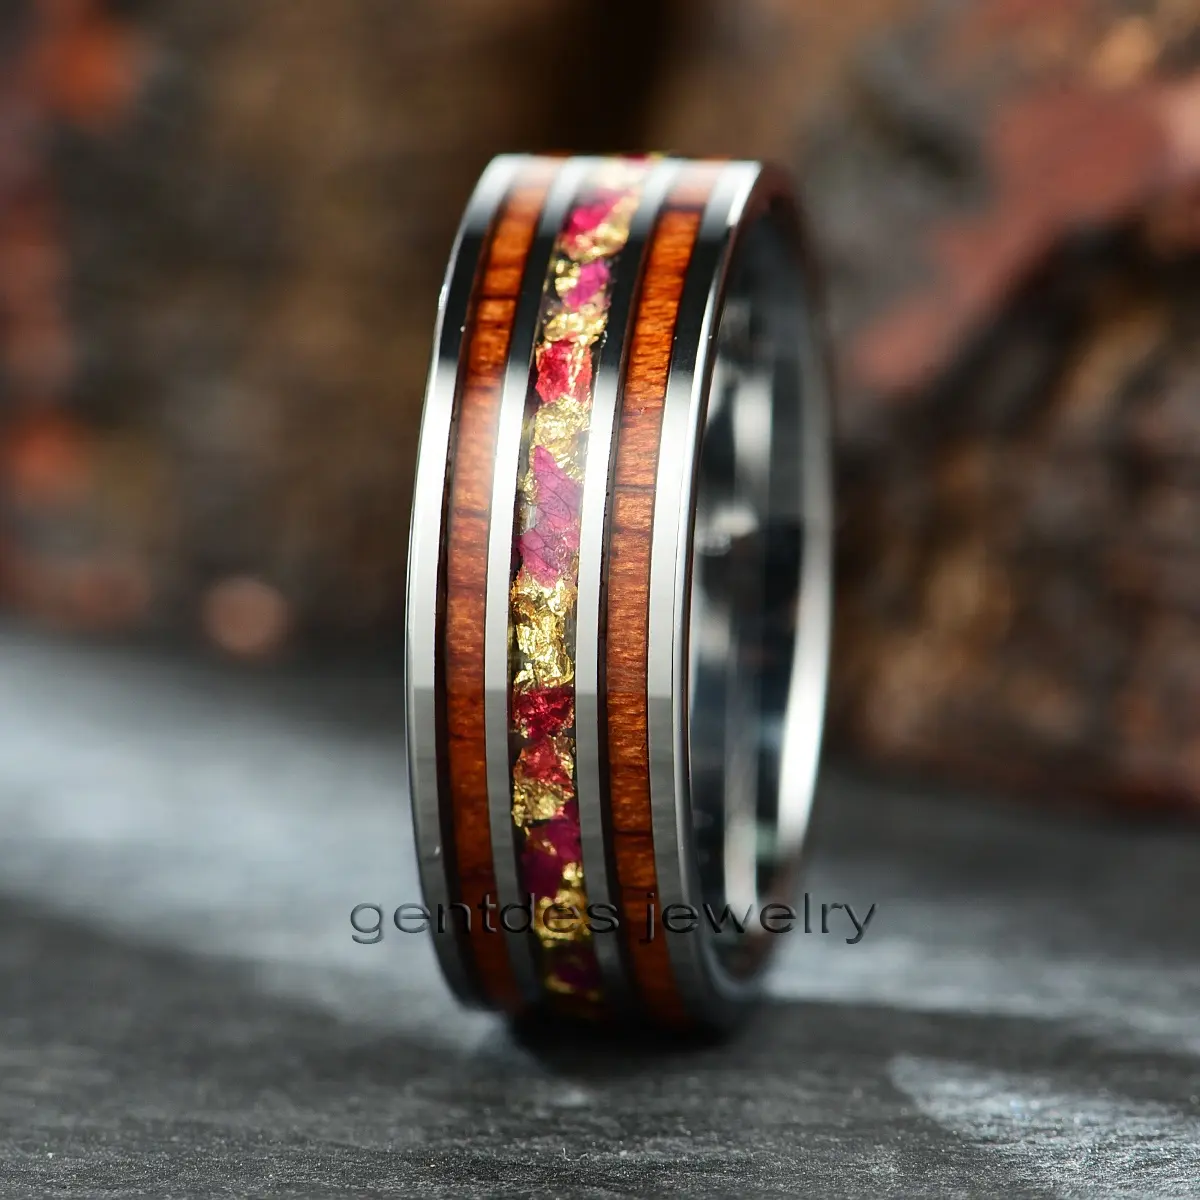 Gentdes Jewelry 8mm Flat Fashion Wood Veneers And Beautiful Flower Inlay Silver Tungsten Carbide Ring For Men Women Wedding Ring